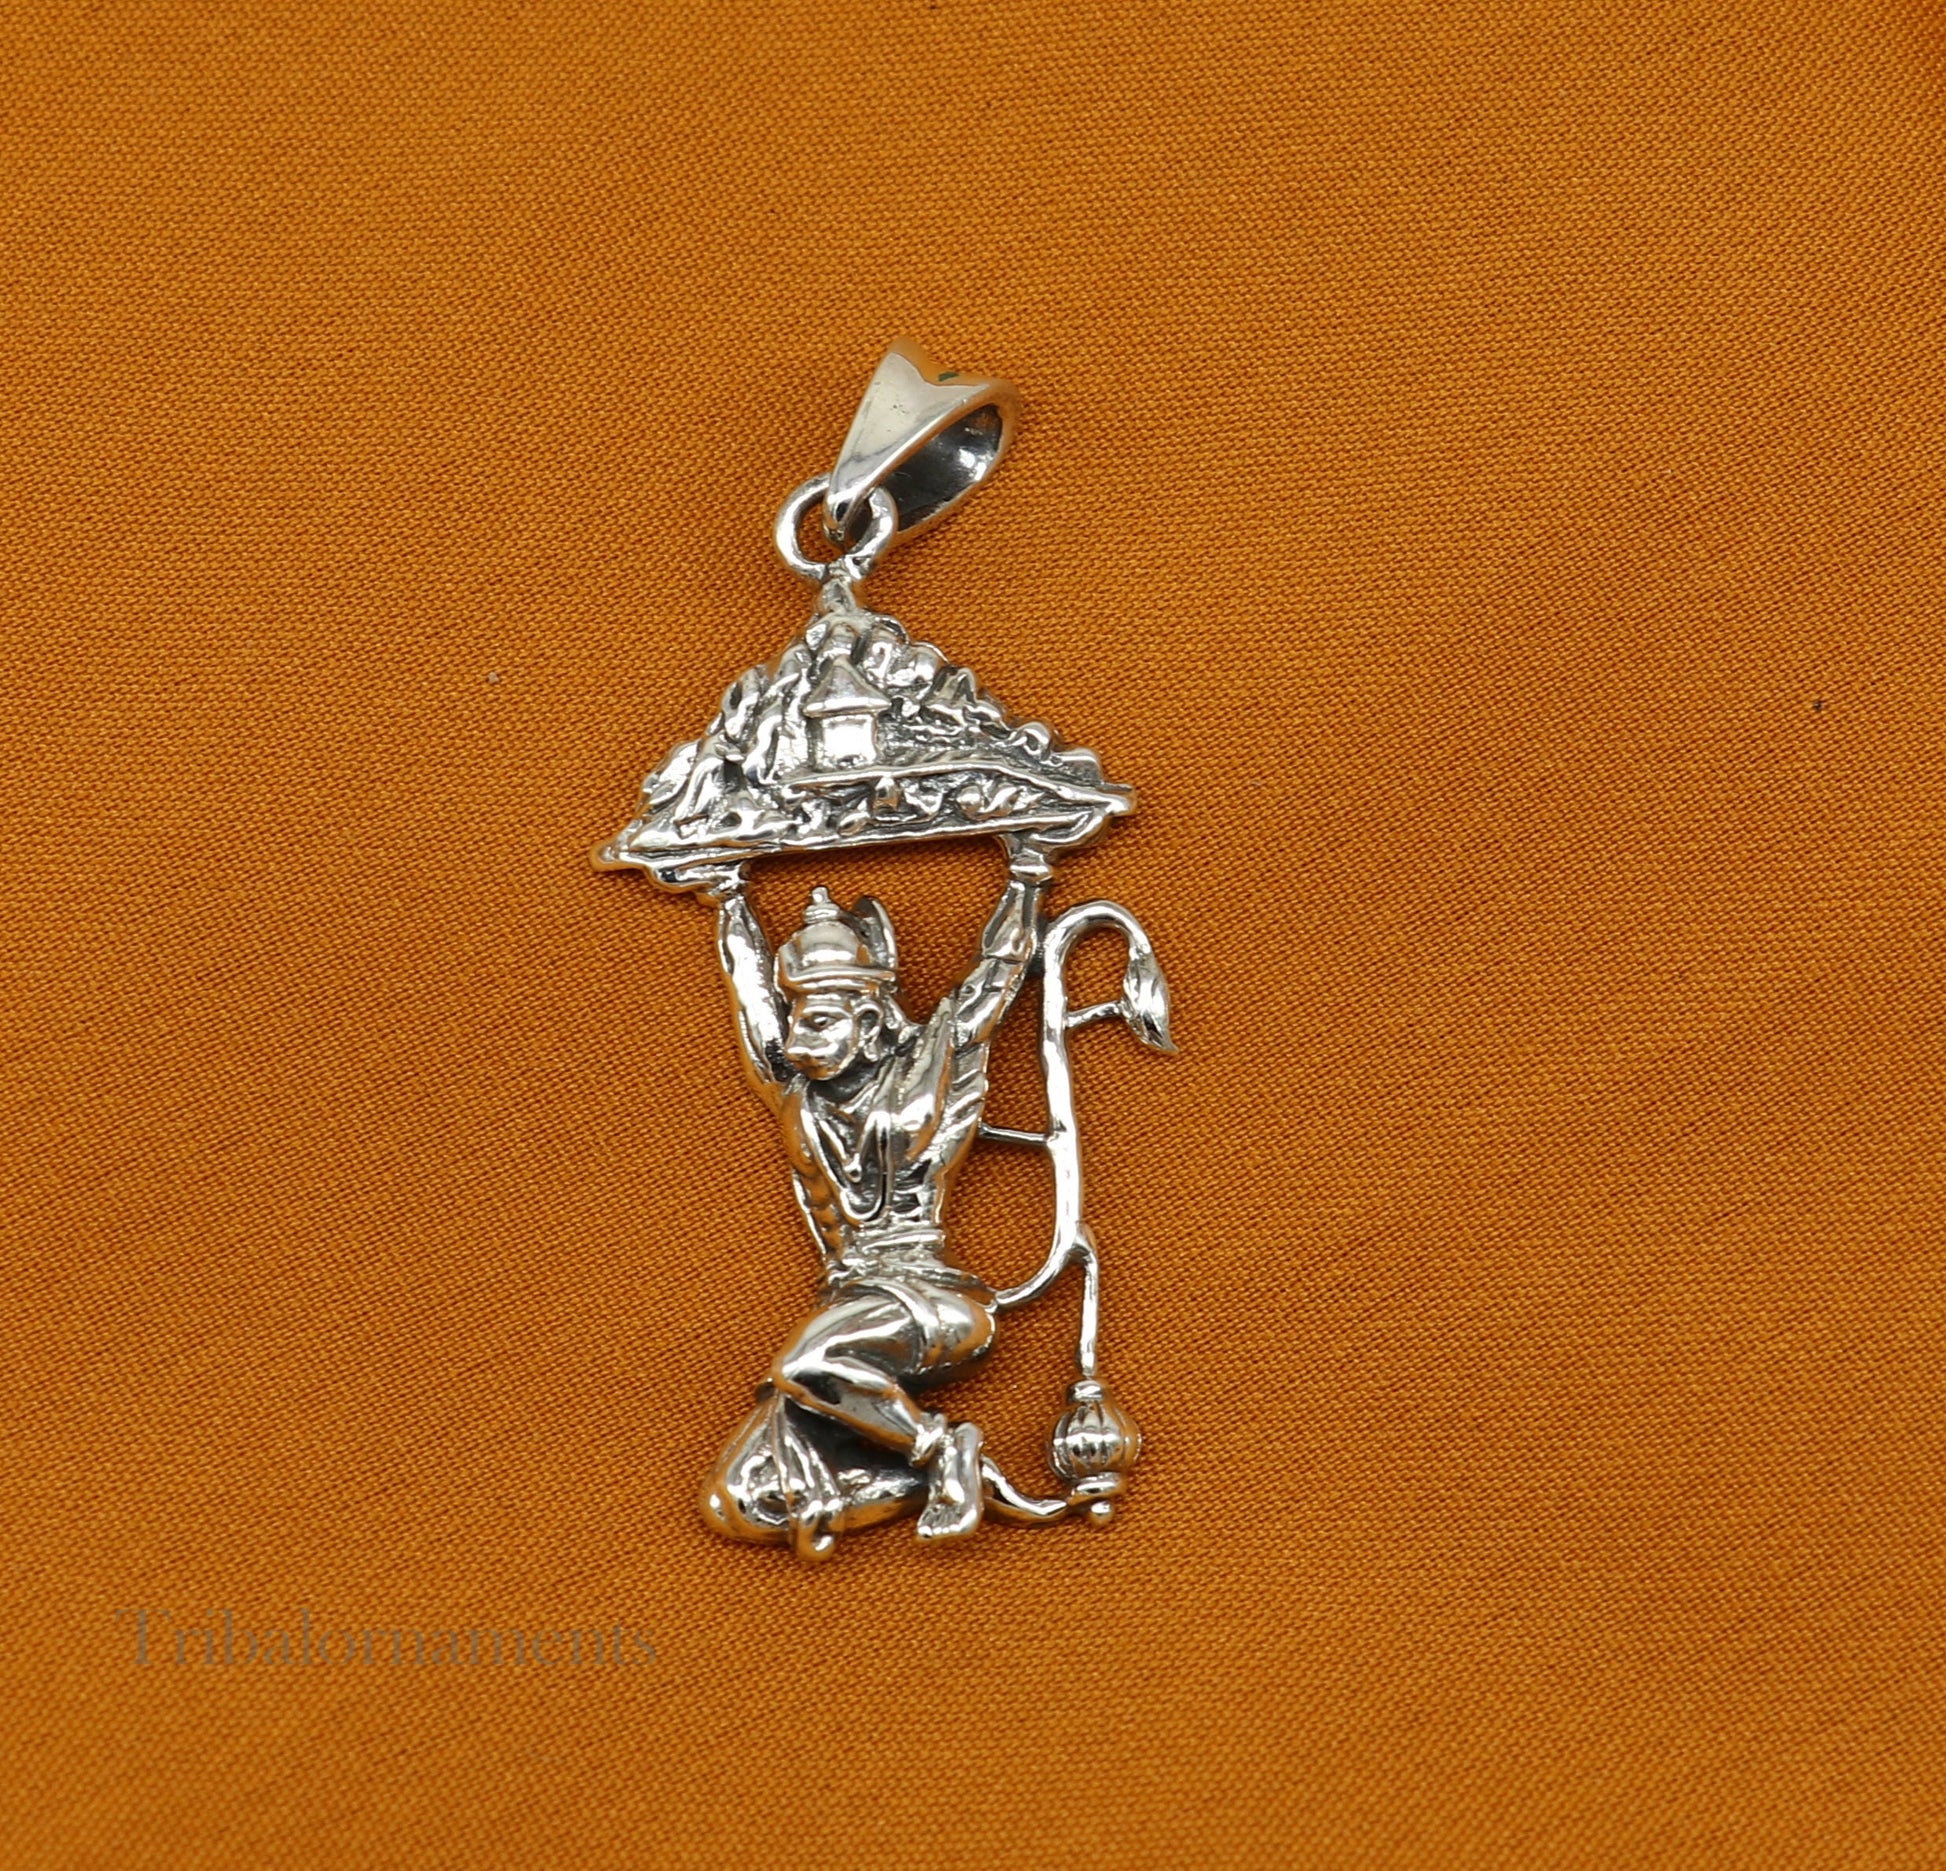 Lord hanuman with mount pendant 92.5 sterling silver handmade divine blessing pendant, amazing craftsmanship pendant gifting jewelry ssp906 - TRIBAL ORNAMENTS